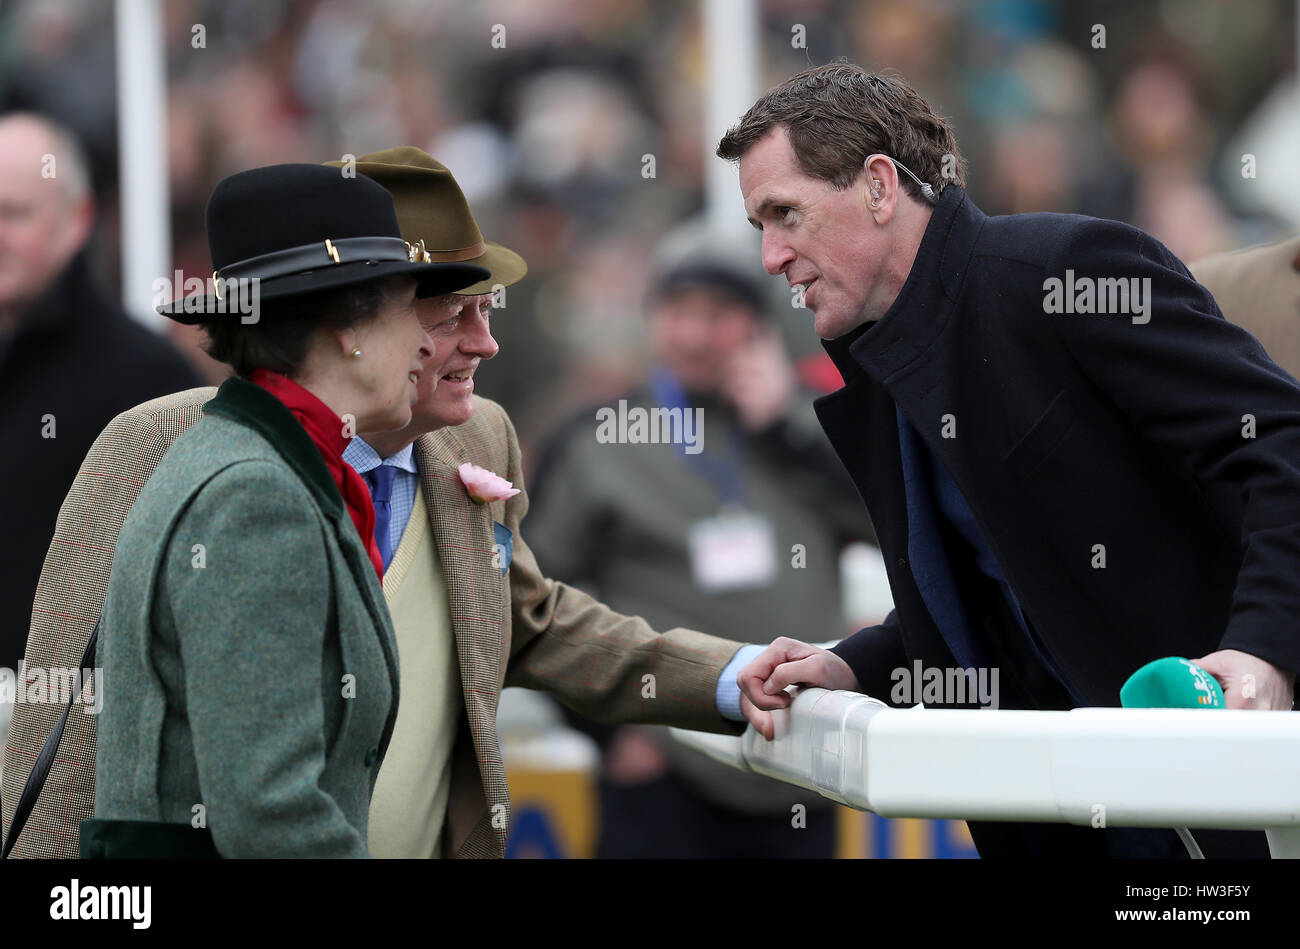 Princess Anne talks to AP McCoy during St Patrick's Thursday of the 2017 Cheltenham Festival at Cheltenham Racecourse. PRESS ASSOCIATION Photo. Picture date: Thursday March 16, 2017. See PA story RACING Cheltenham. Photo credit should read: David Davies/PA Wire. RESTRICTIONS: Editorial Use only, commercial use is subject to prior permission from The Jockey Club/Cheltenham Racecourse. Stock Photo